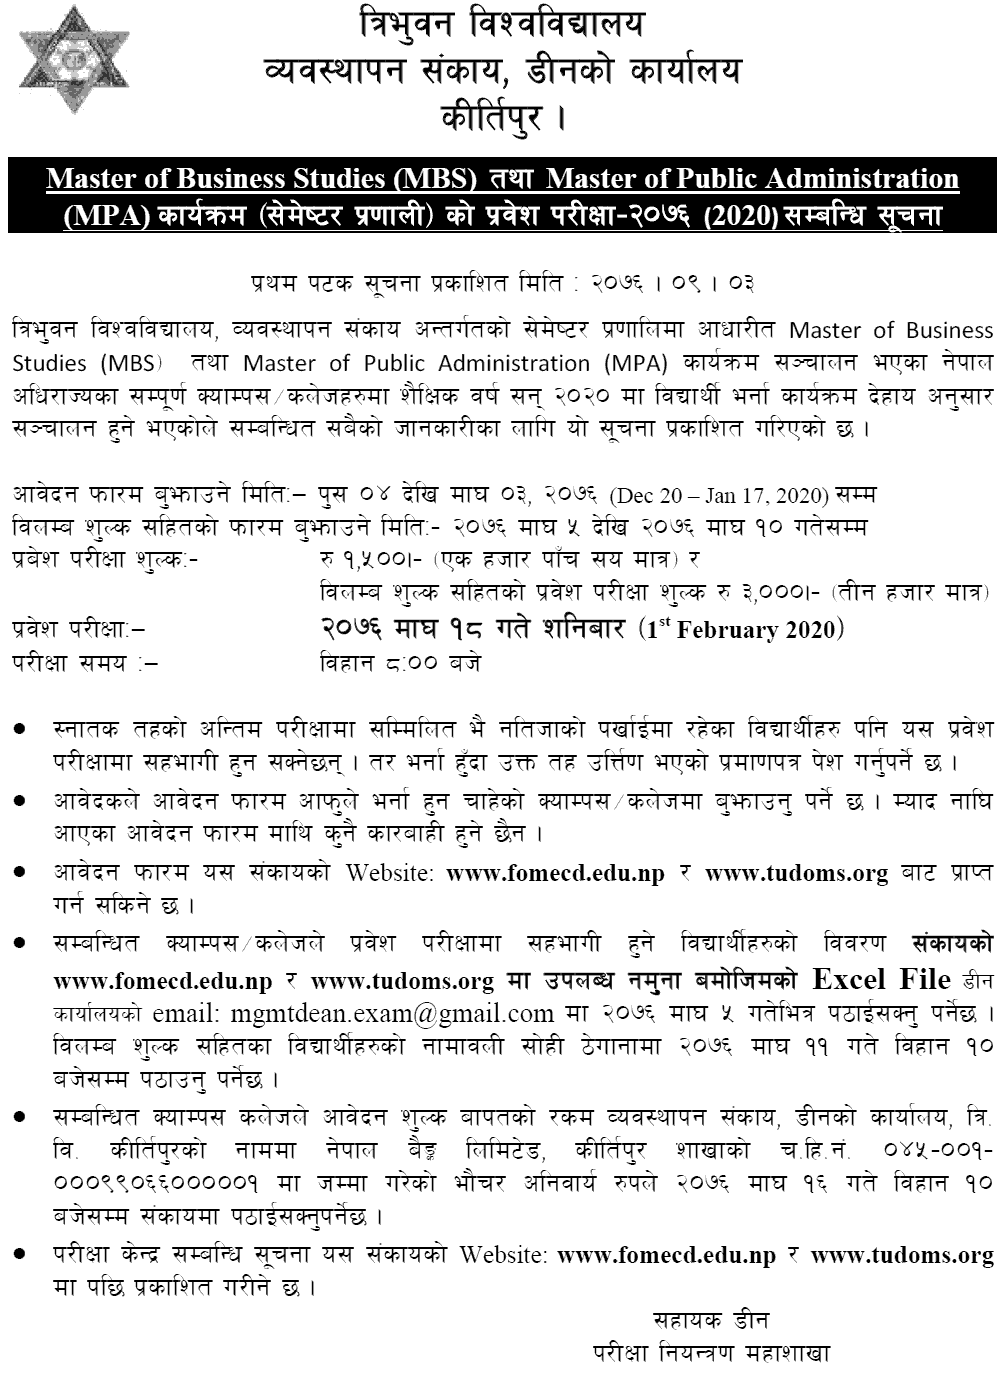 MBS and MPA Admission Open Notice  (Semester System) from Tribhuvan University